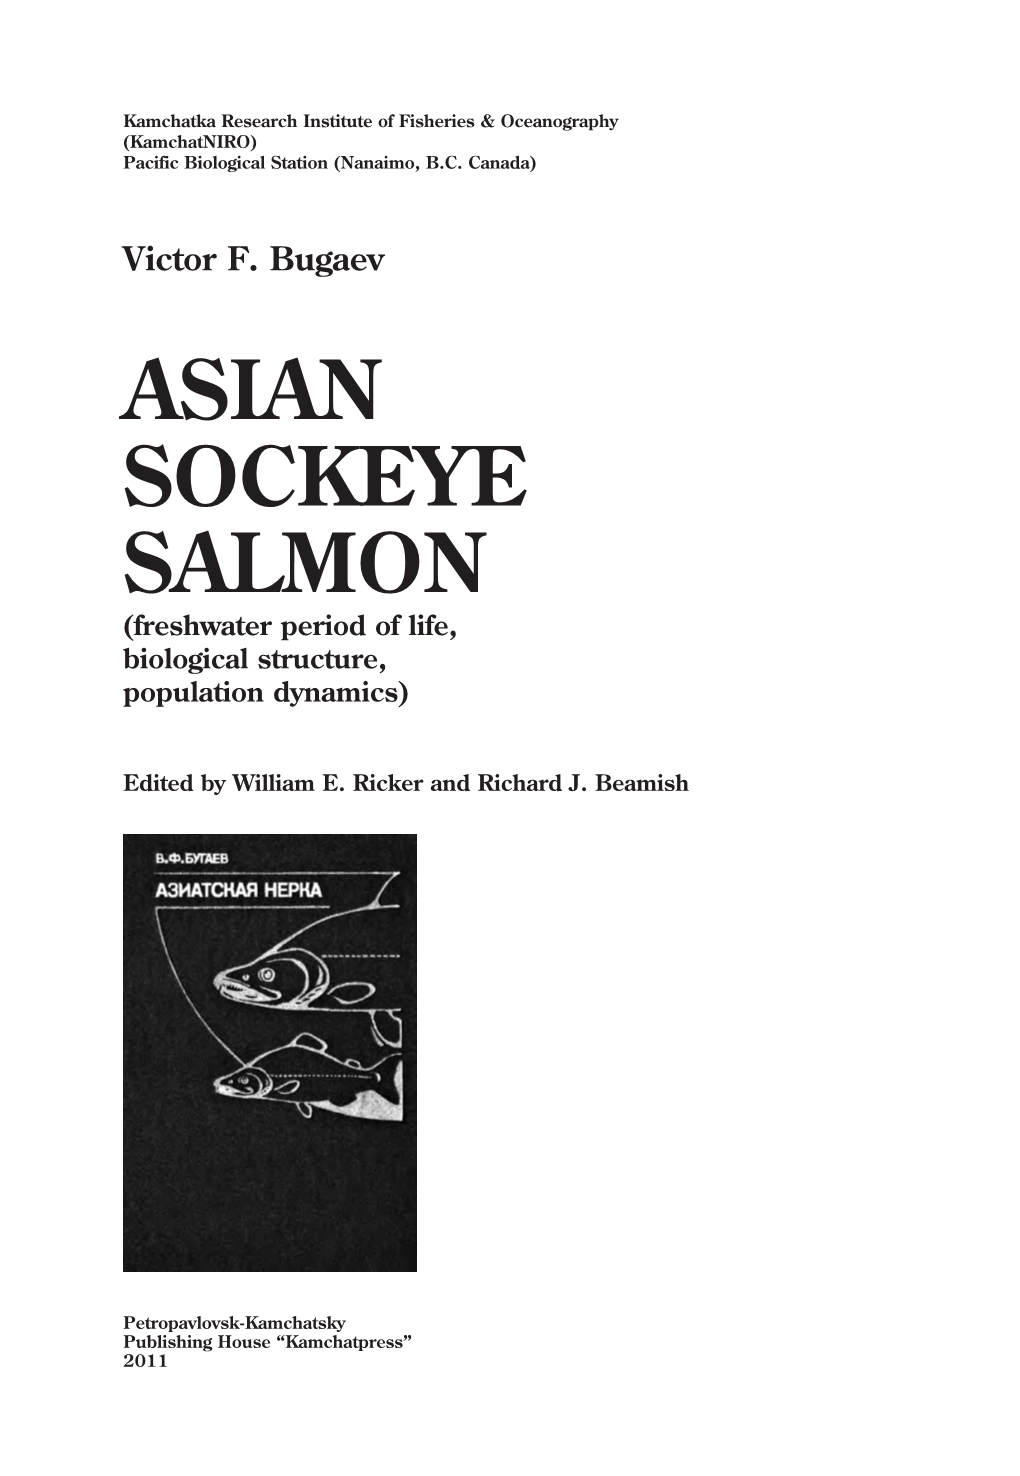 ASIAN SOCKEYE SALMON (Freshwater Period of Life, Biological Structure, Population Dynamics)